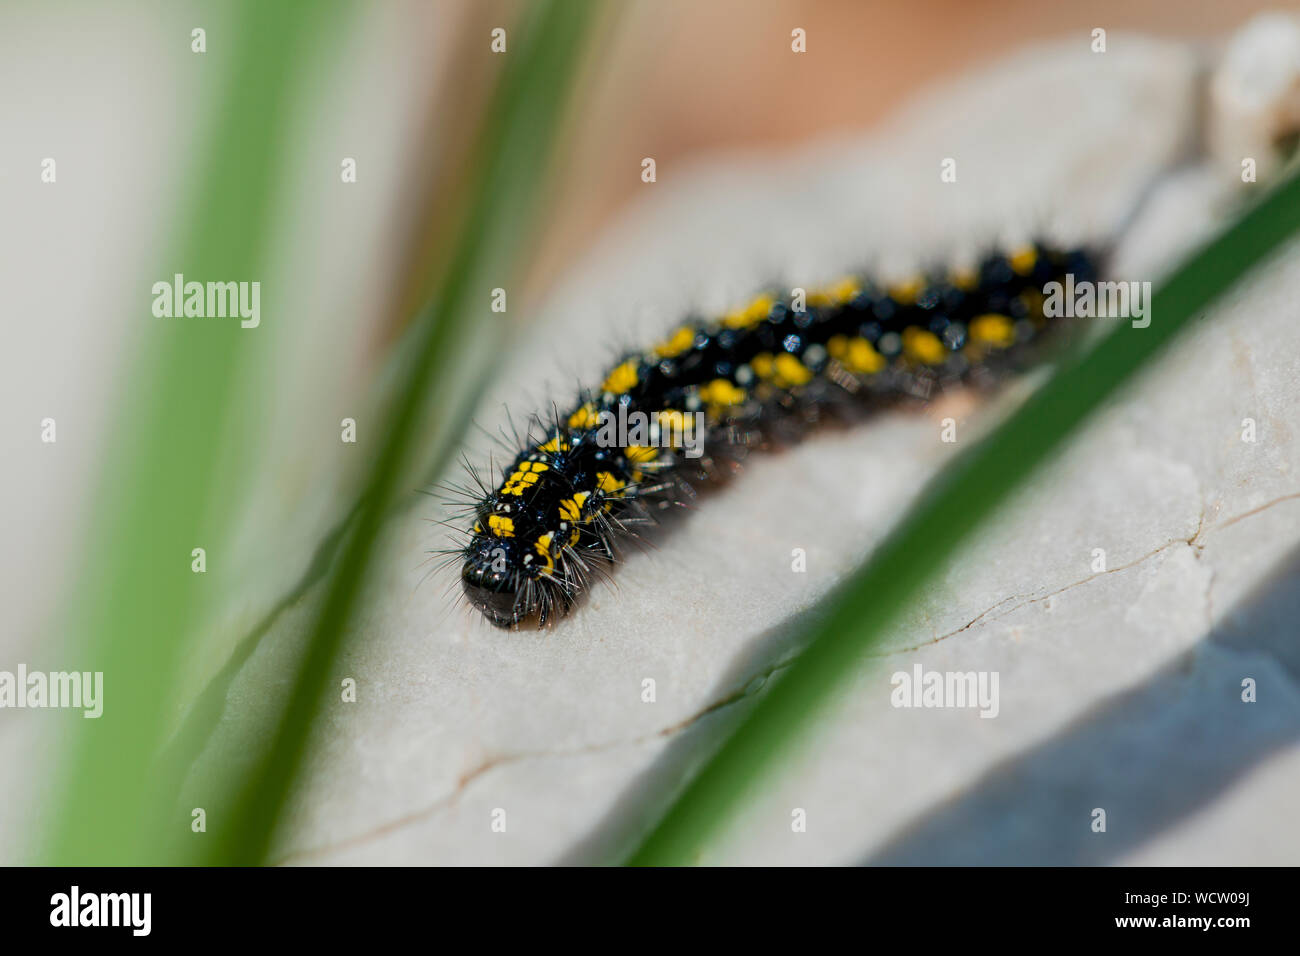 beautiful black and yellow centipedes on a stone Stock Photo